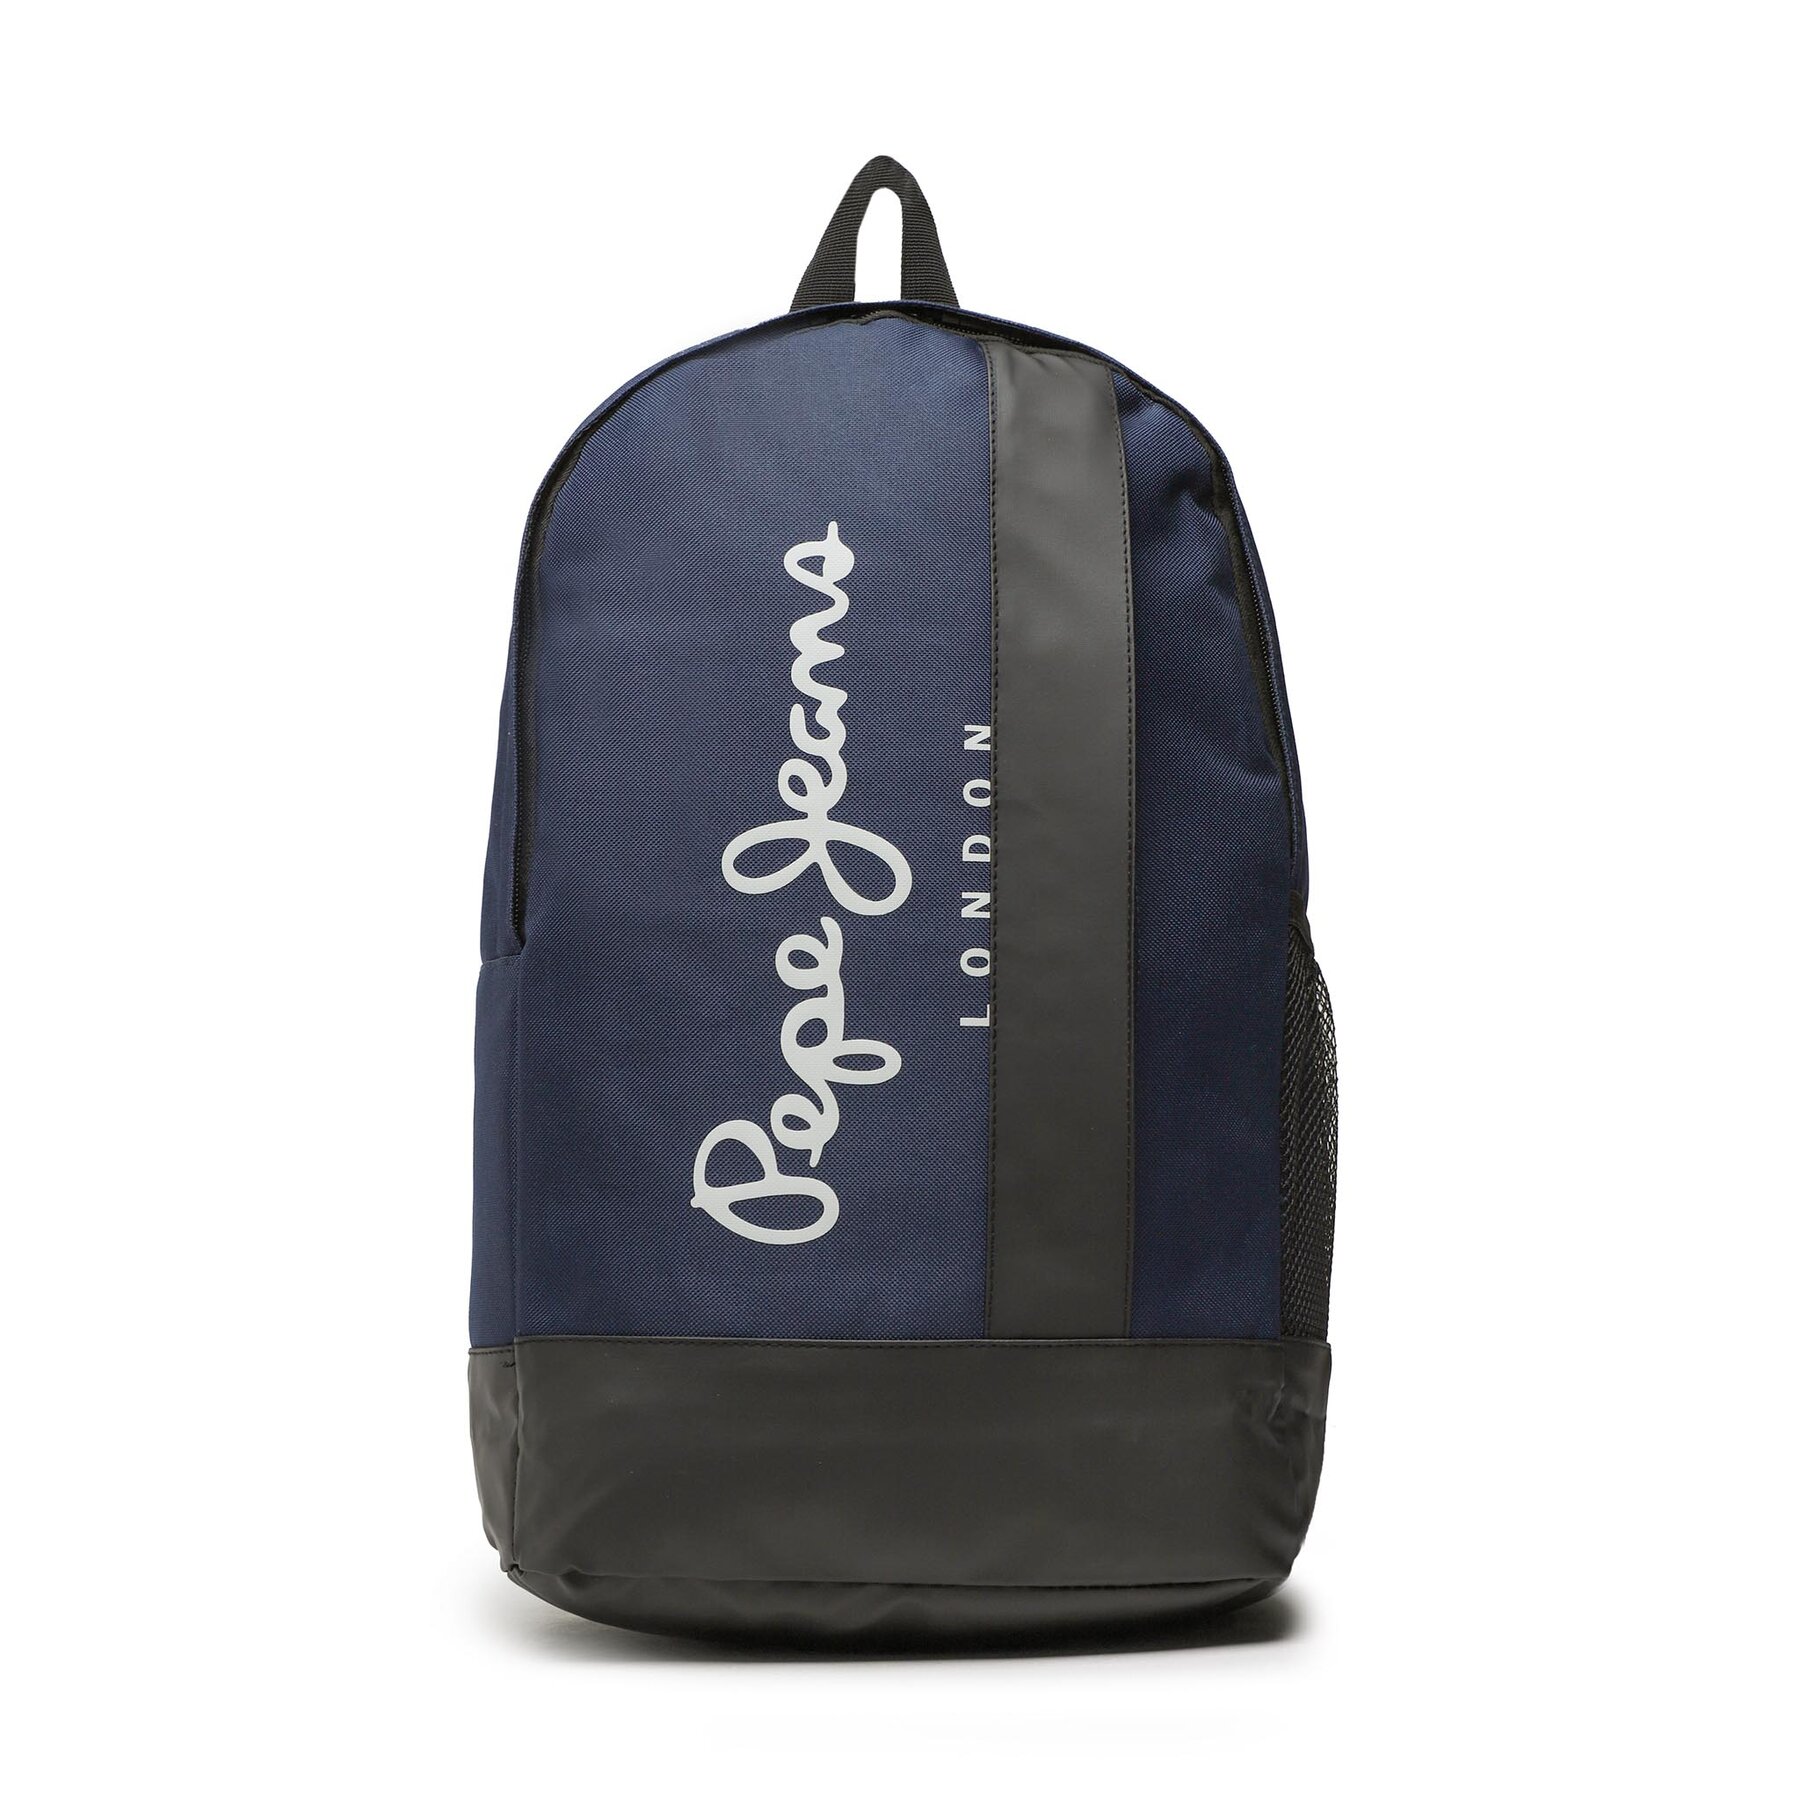 Rucksack Pepe Jeans Owen Backpack PM030700 dulwich 594 von Pepe Jeans